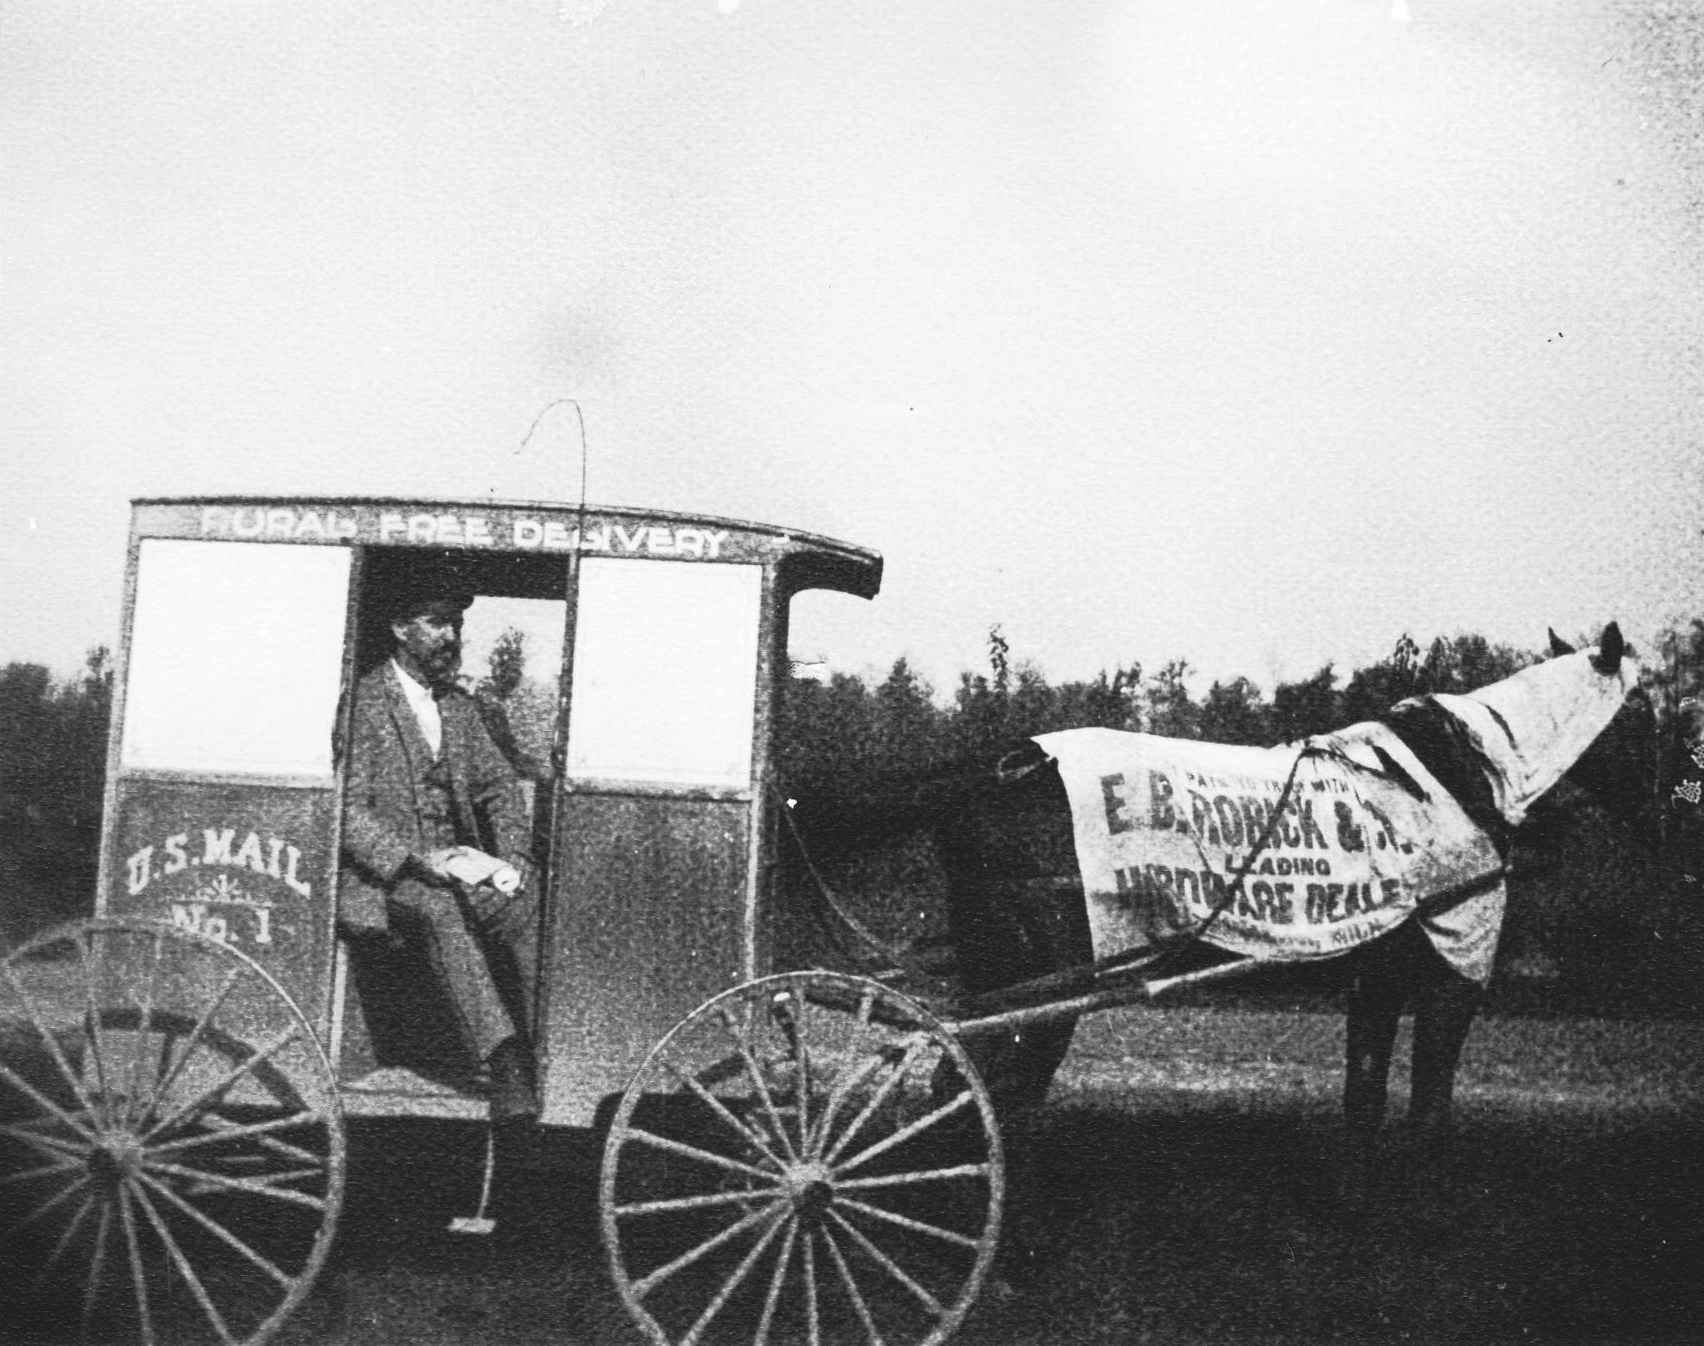 Rural Free Delivery, U.S. Mail – started in 1896.  Ben Colegrove, carrier.